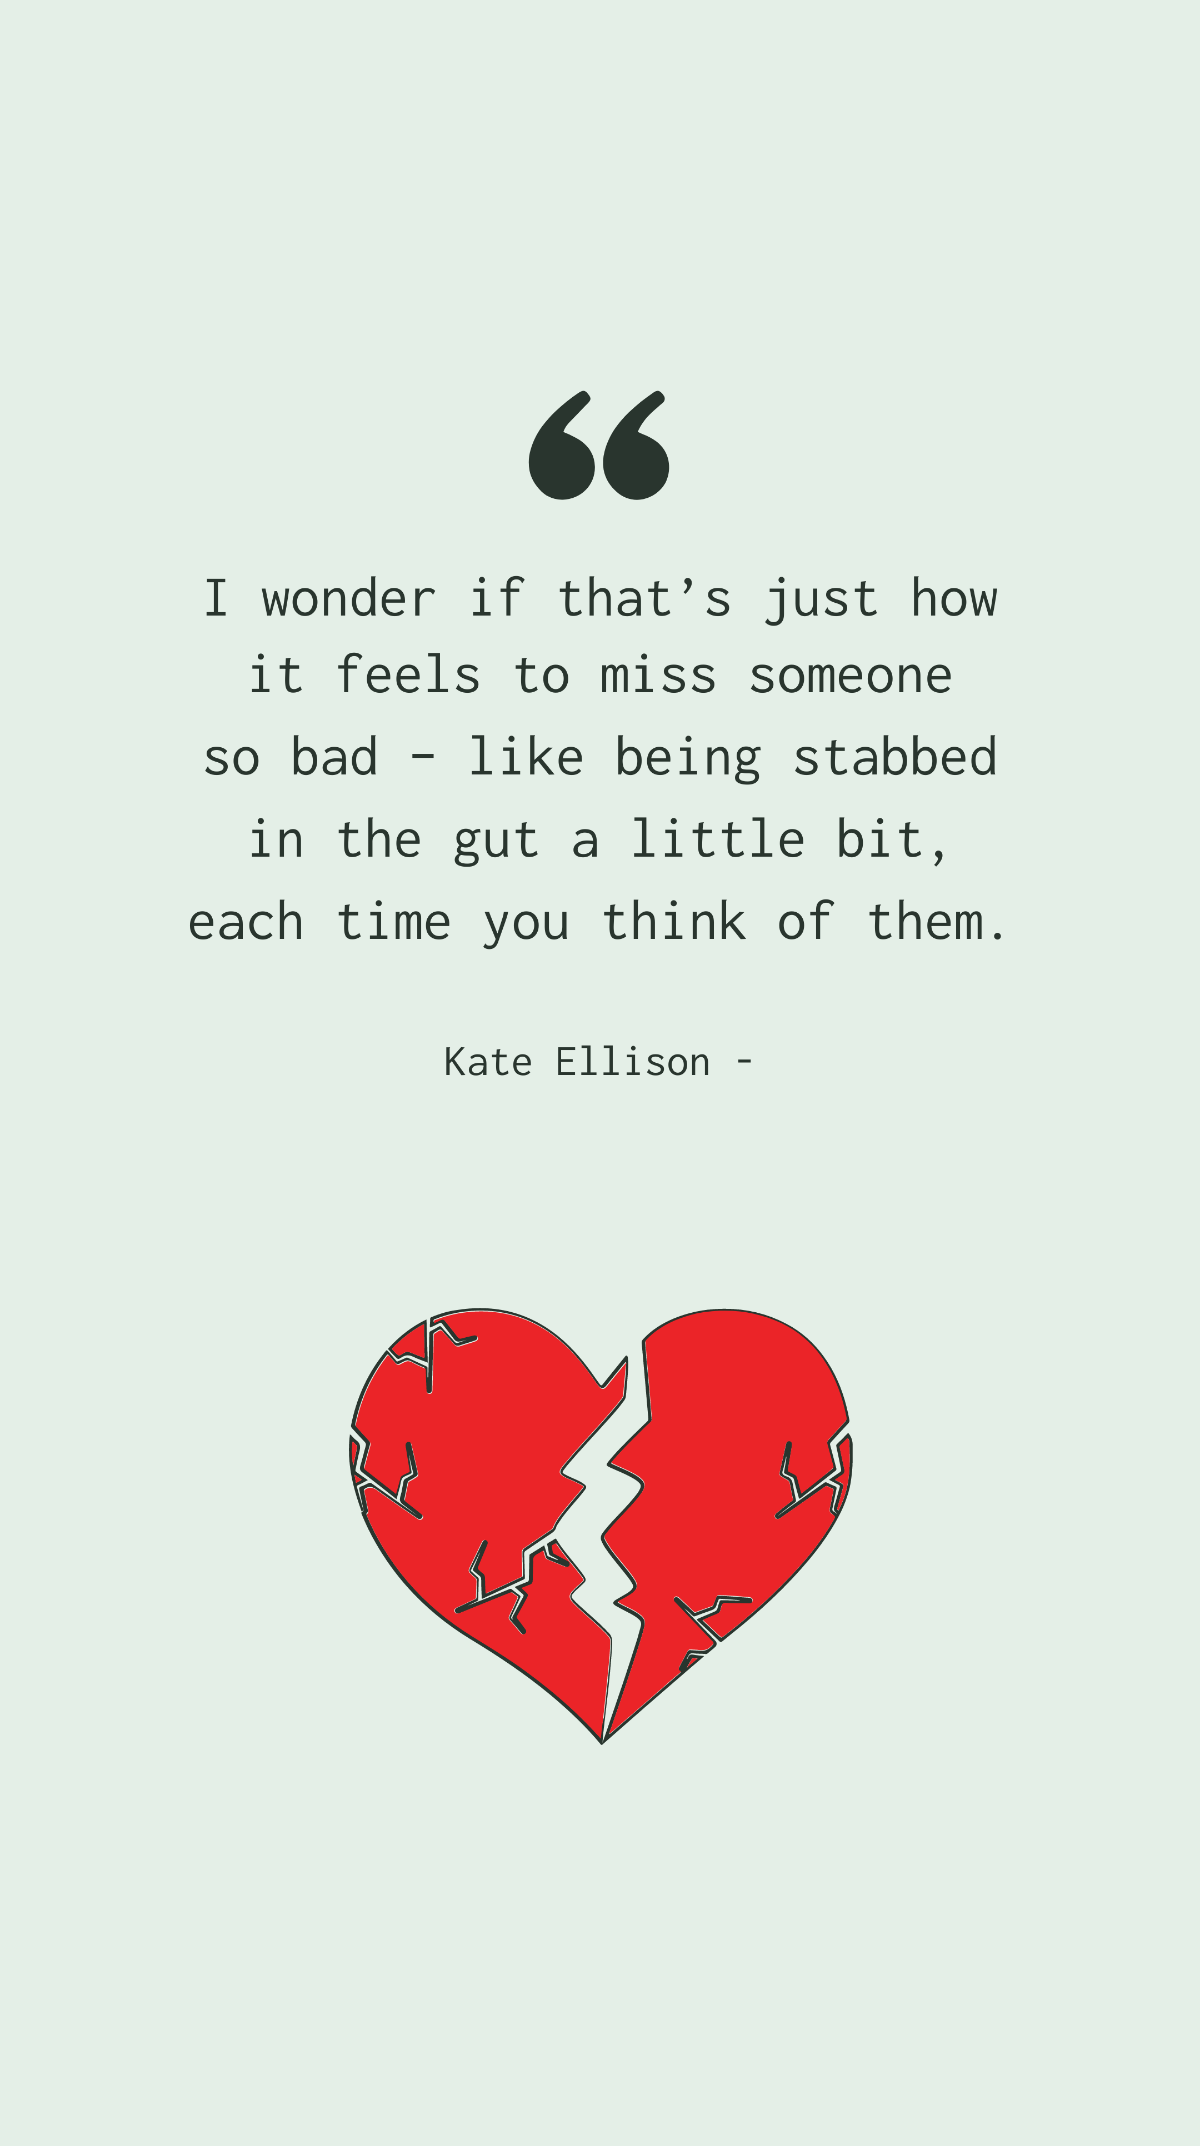 Kate Ellison - I wonder if that’s just how it feels to miss someone so bad – like being stabbed in the gut a little bit, each time you think of them. Template